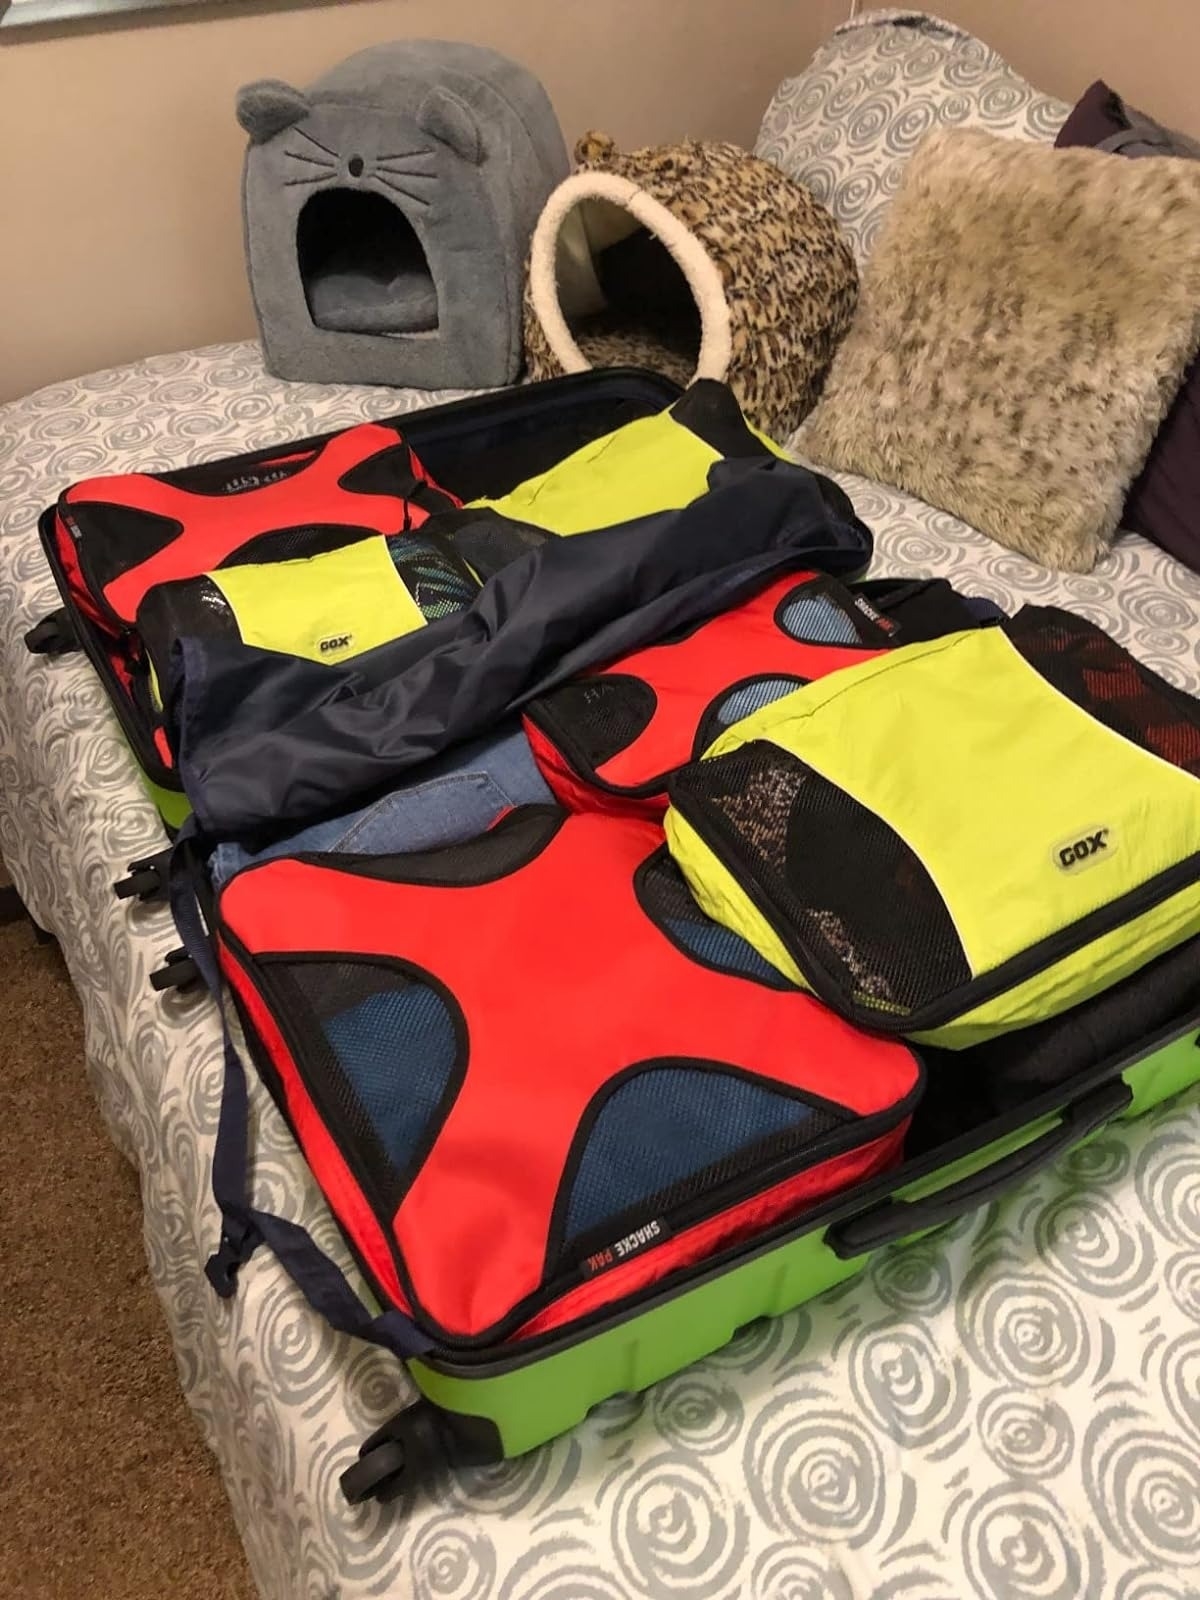 red and yellow packing cubes with clothes in a suitcase